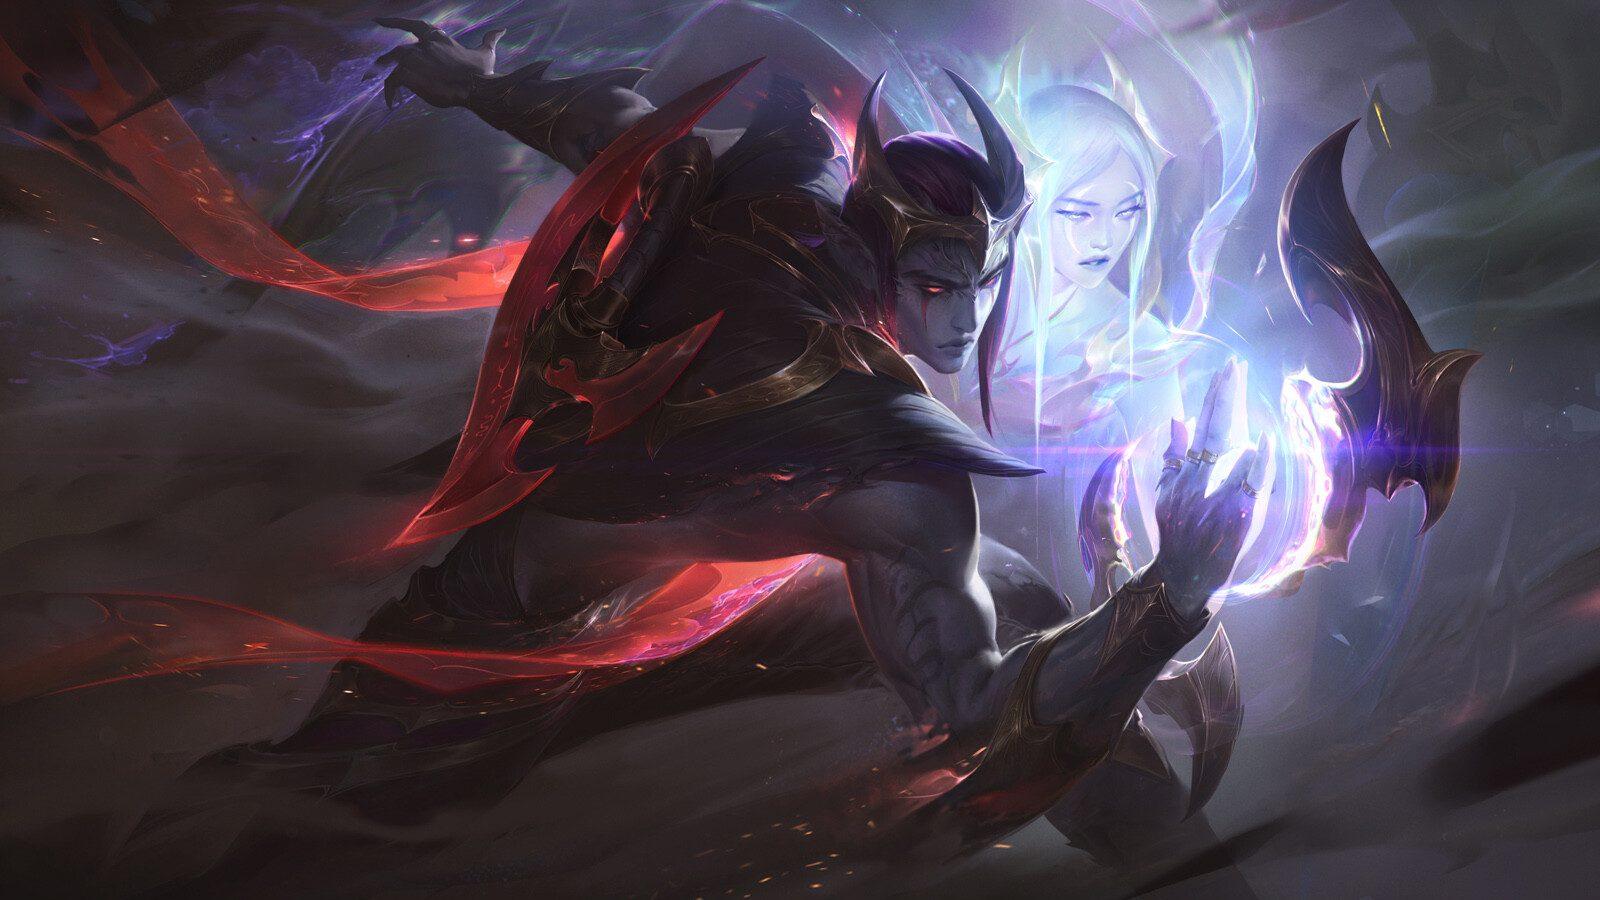 League of Legends Patch 12.17 - Changes for Worlds! 